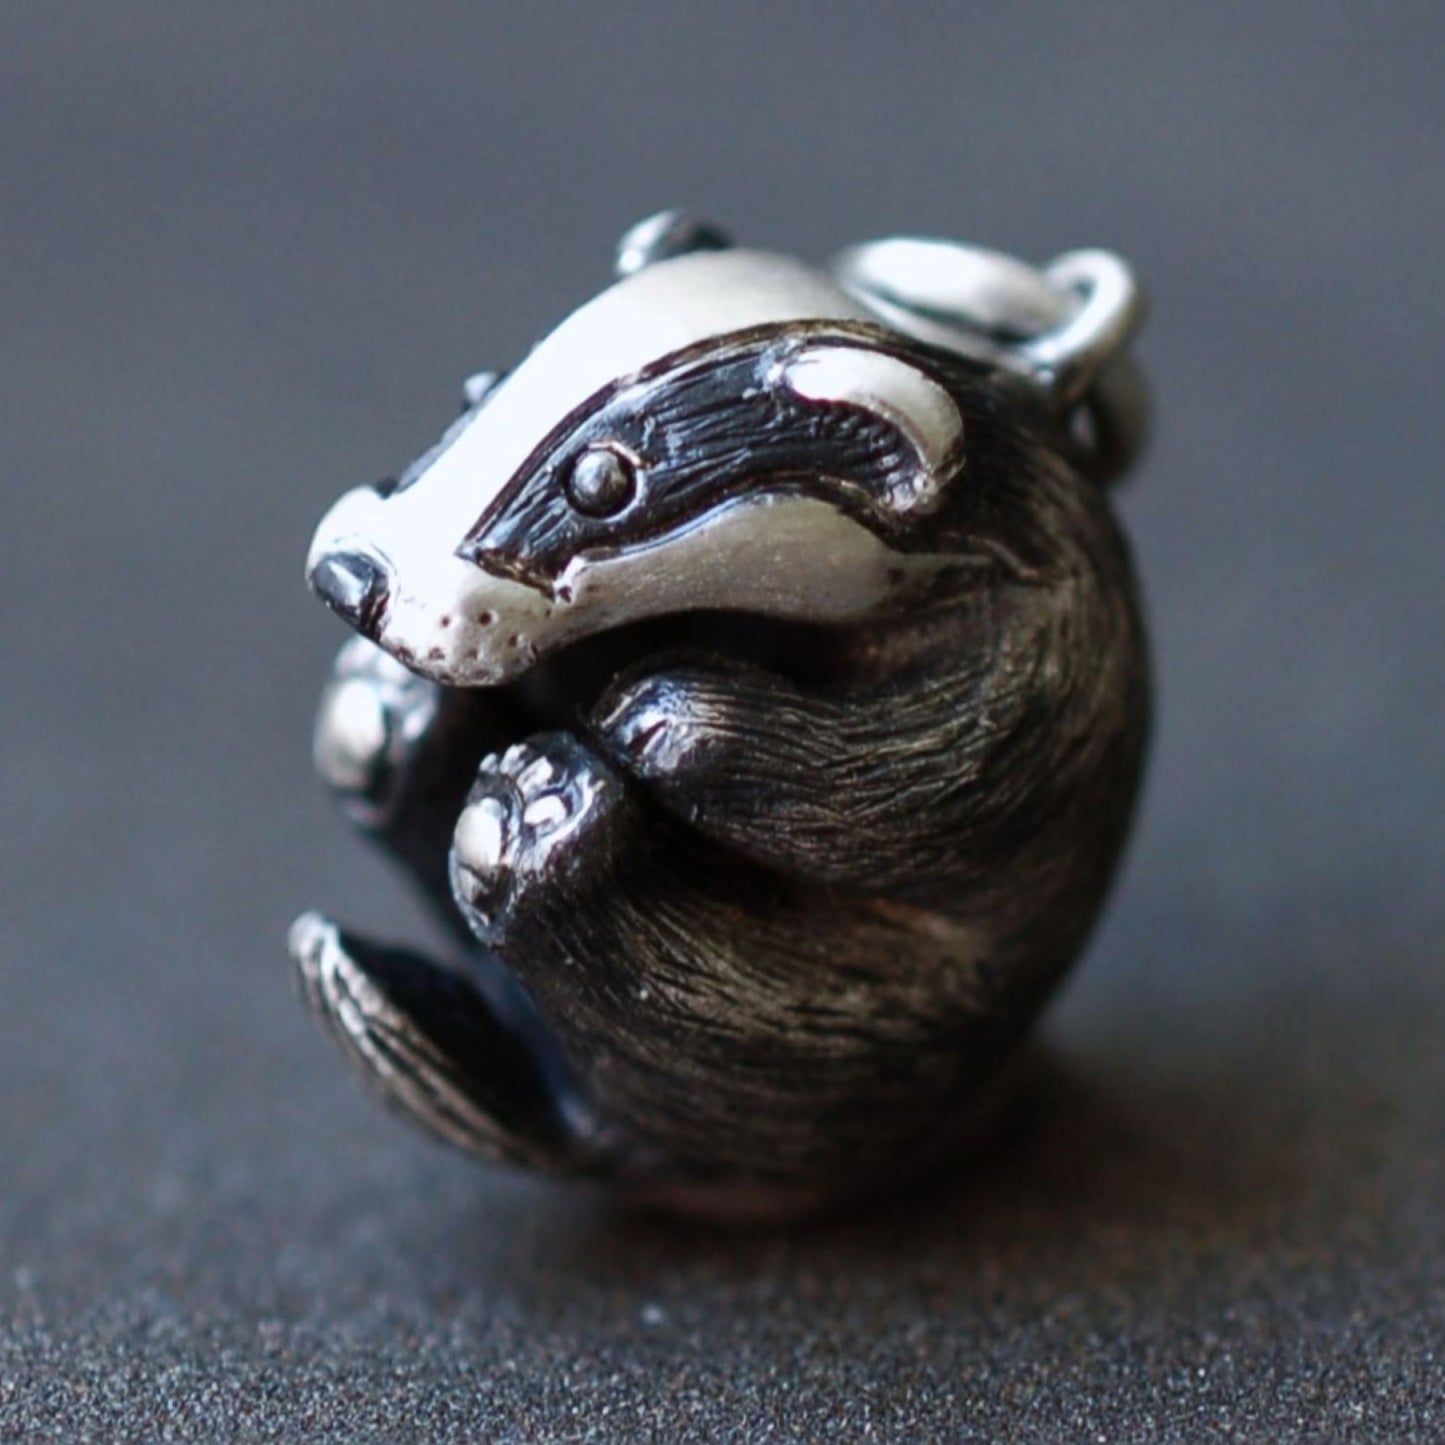 Baby badger necklace, sterling silver wildlife pendant © Adrian Ashley